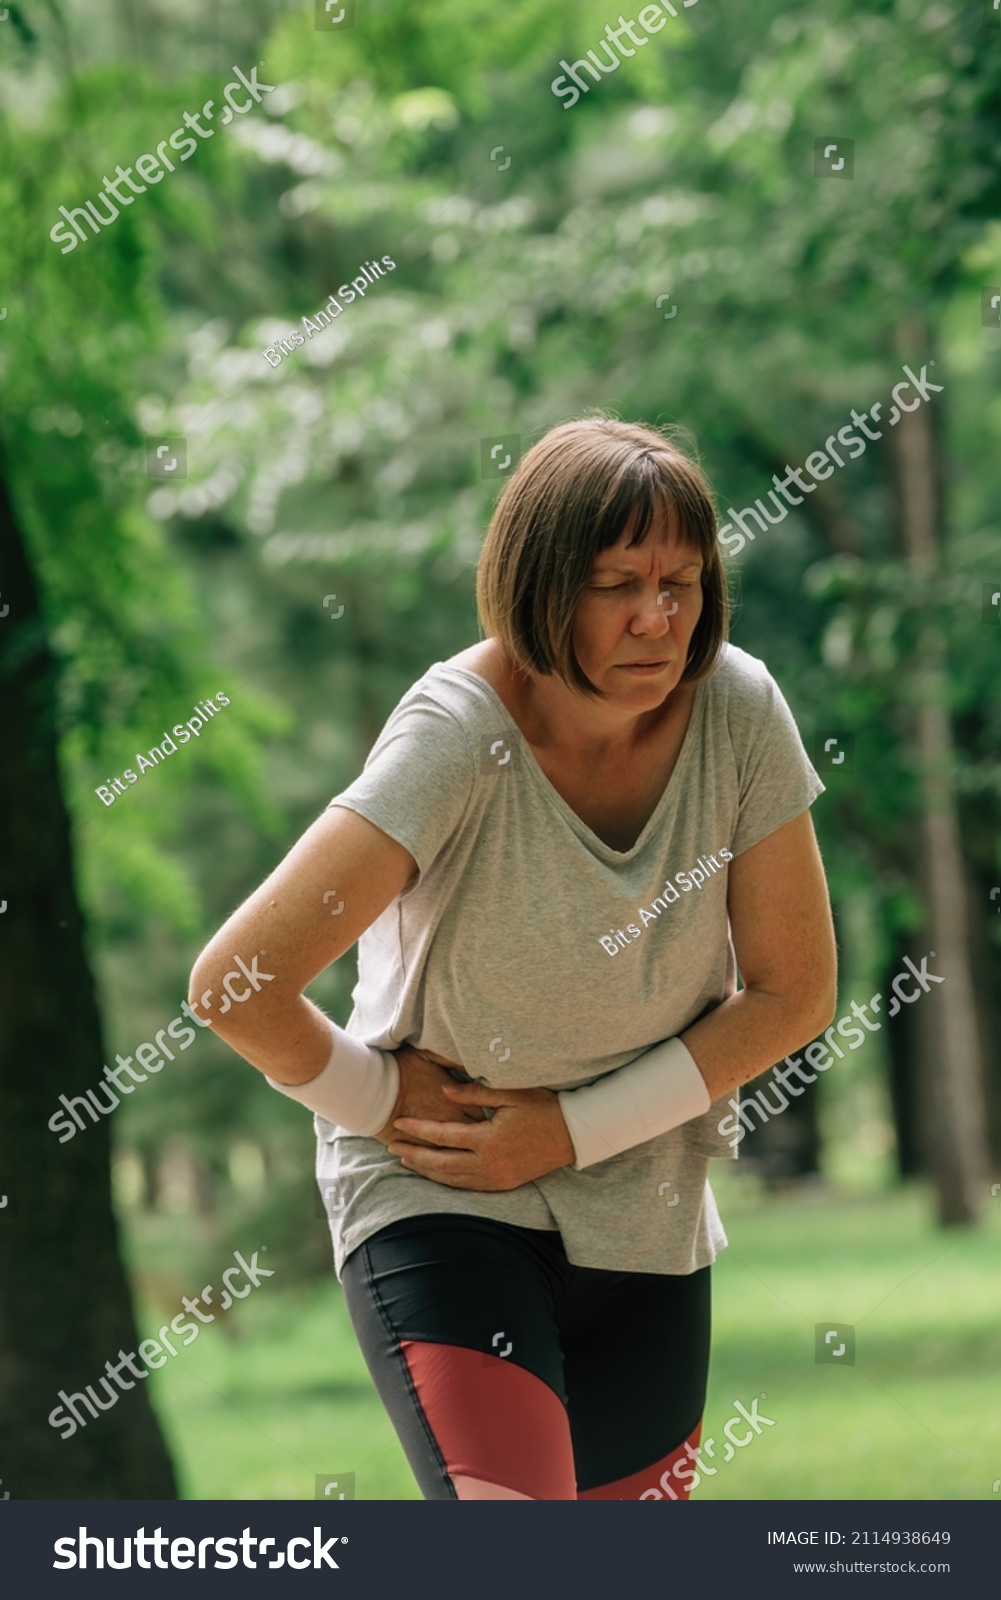 Female jogger with painful face grimace after feeling pain in lower abdomen during running in park #2114938649